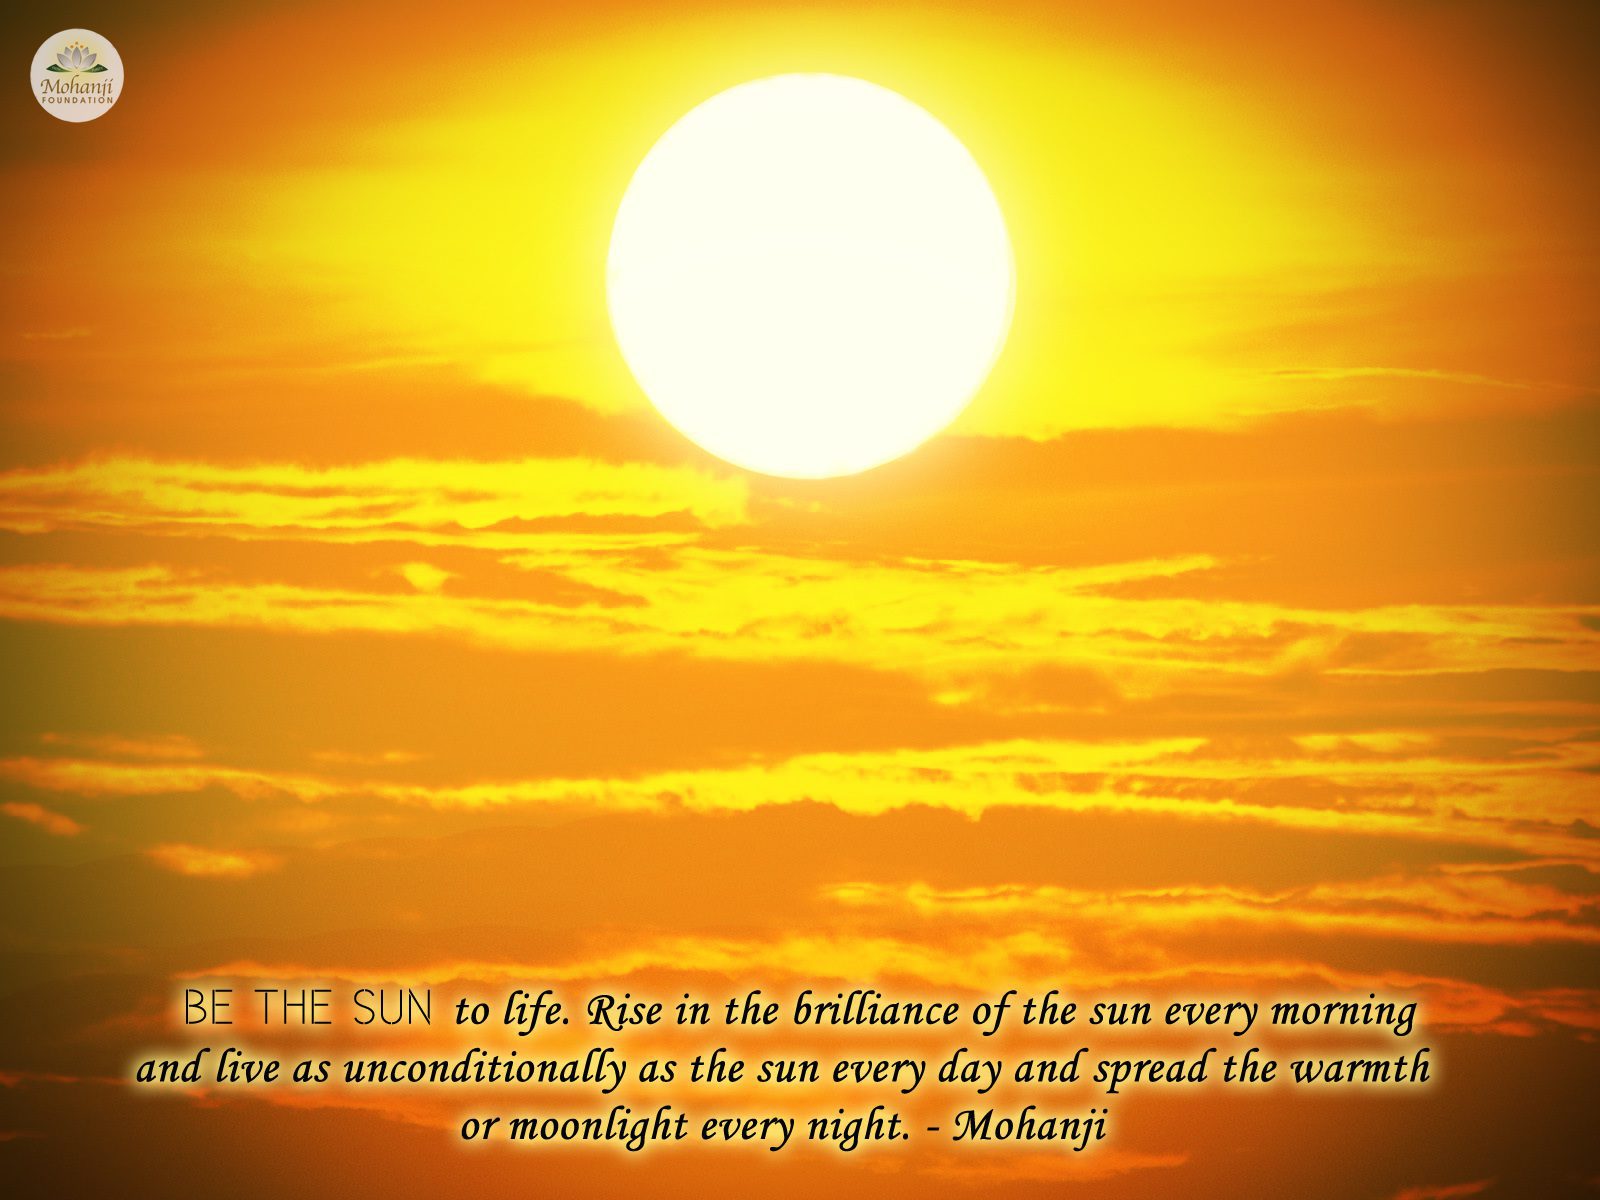 Mohanji quote - Be the sun to life